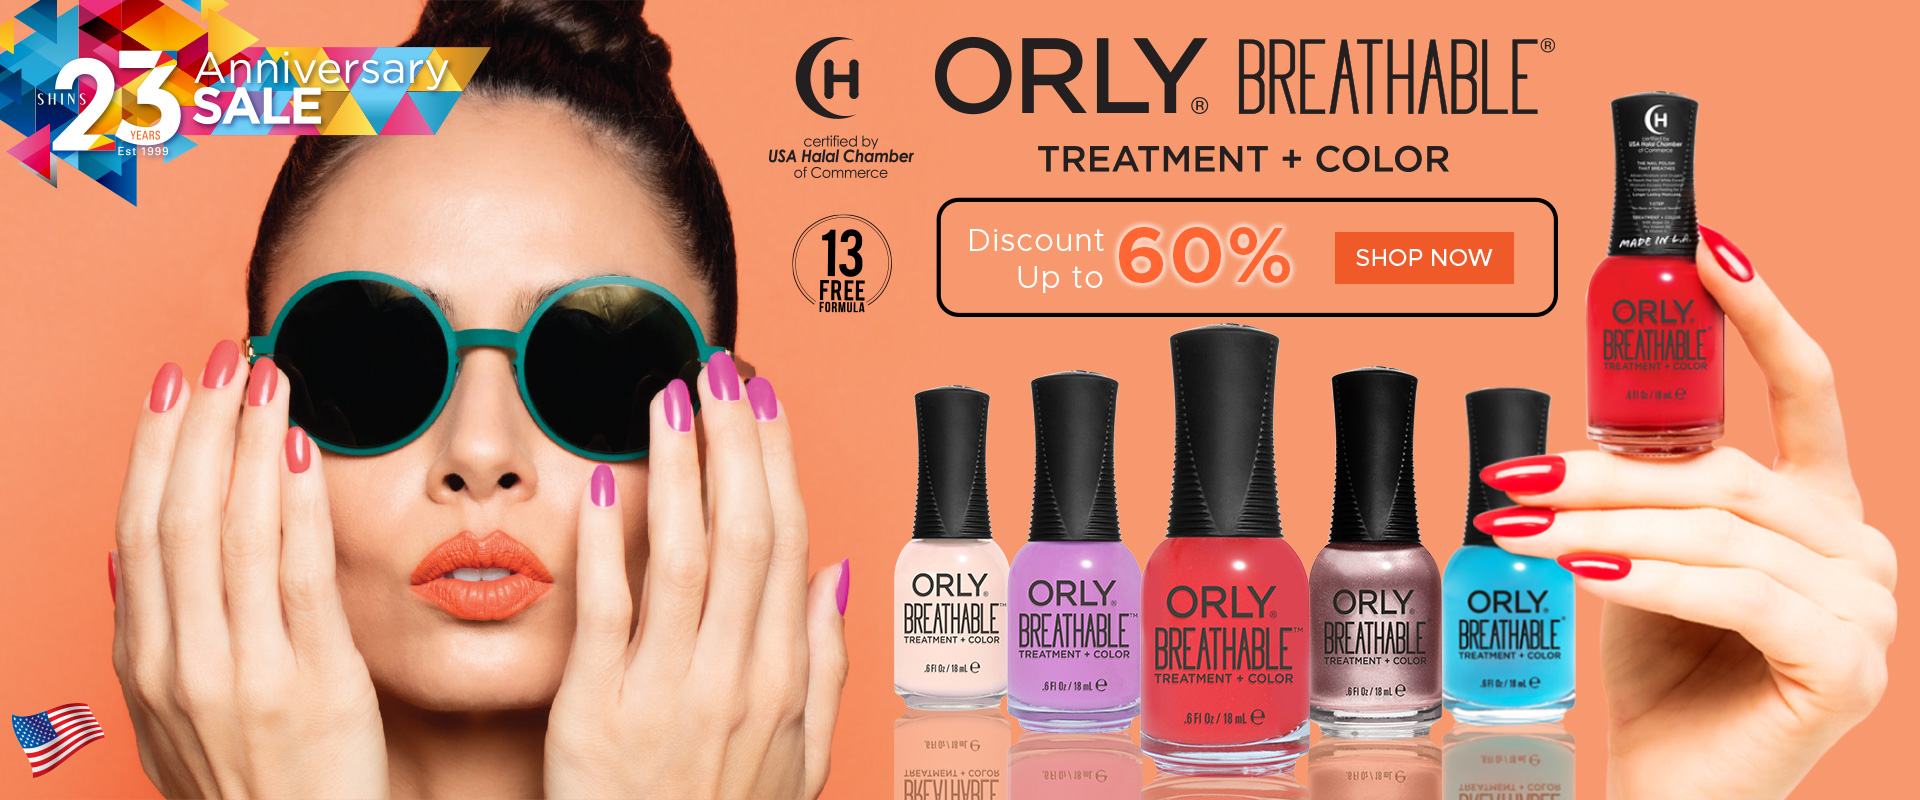 Orly Banner Image